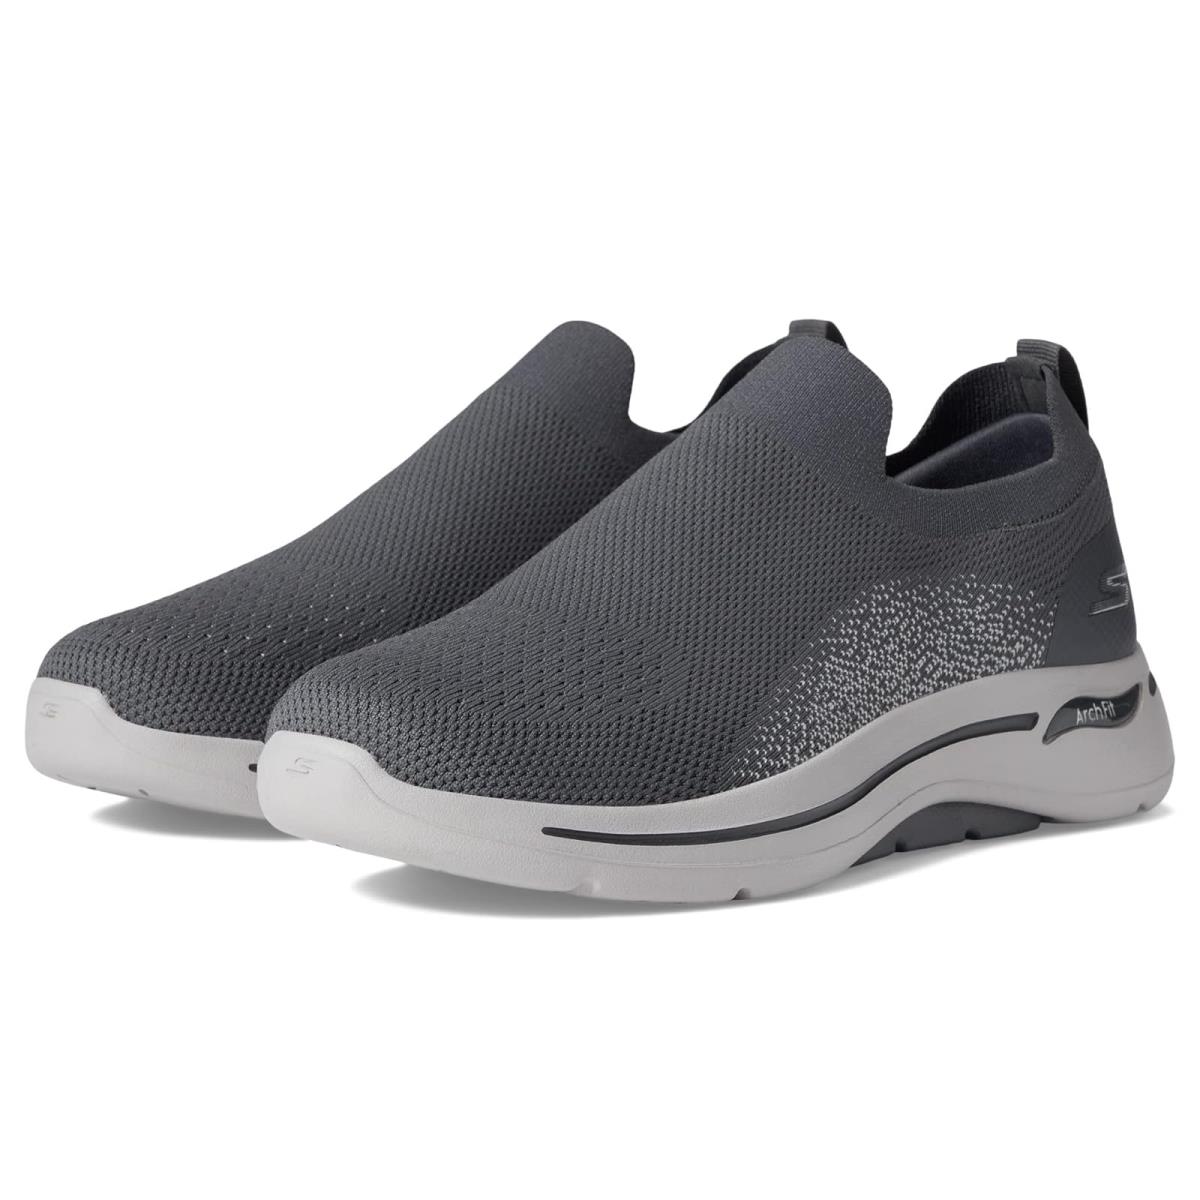 Man`s Shoes Skechers Performance Go Walk Arch Fit - 216136 Charcoal